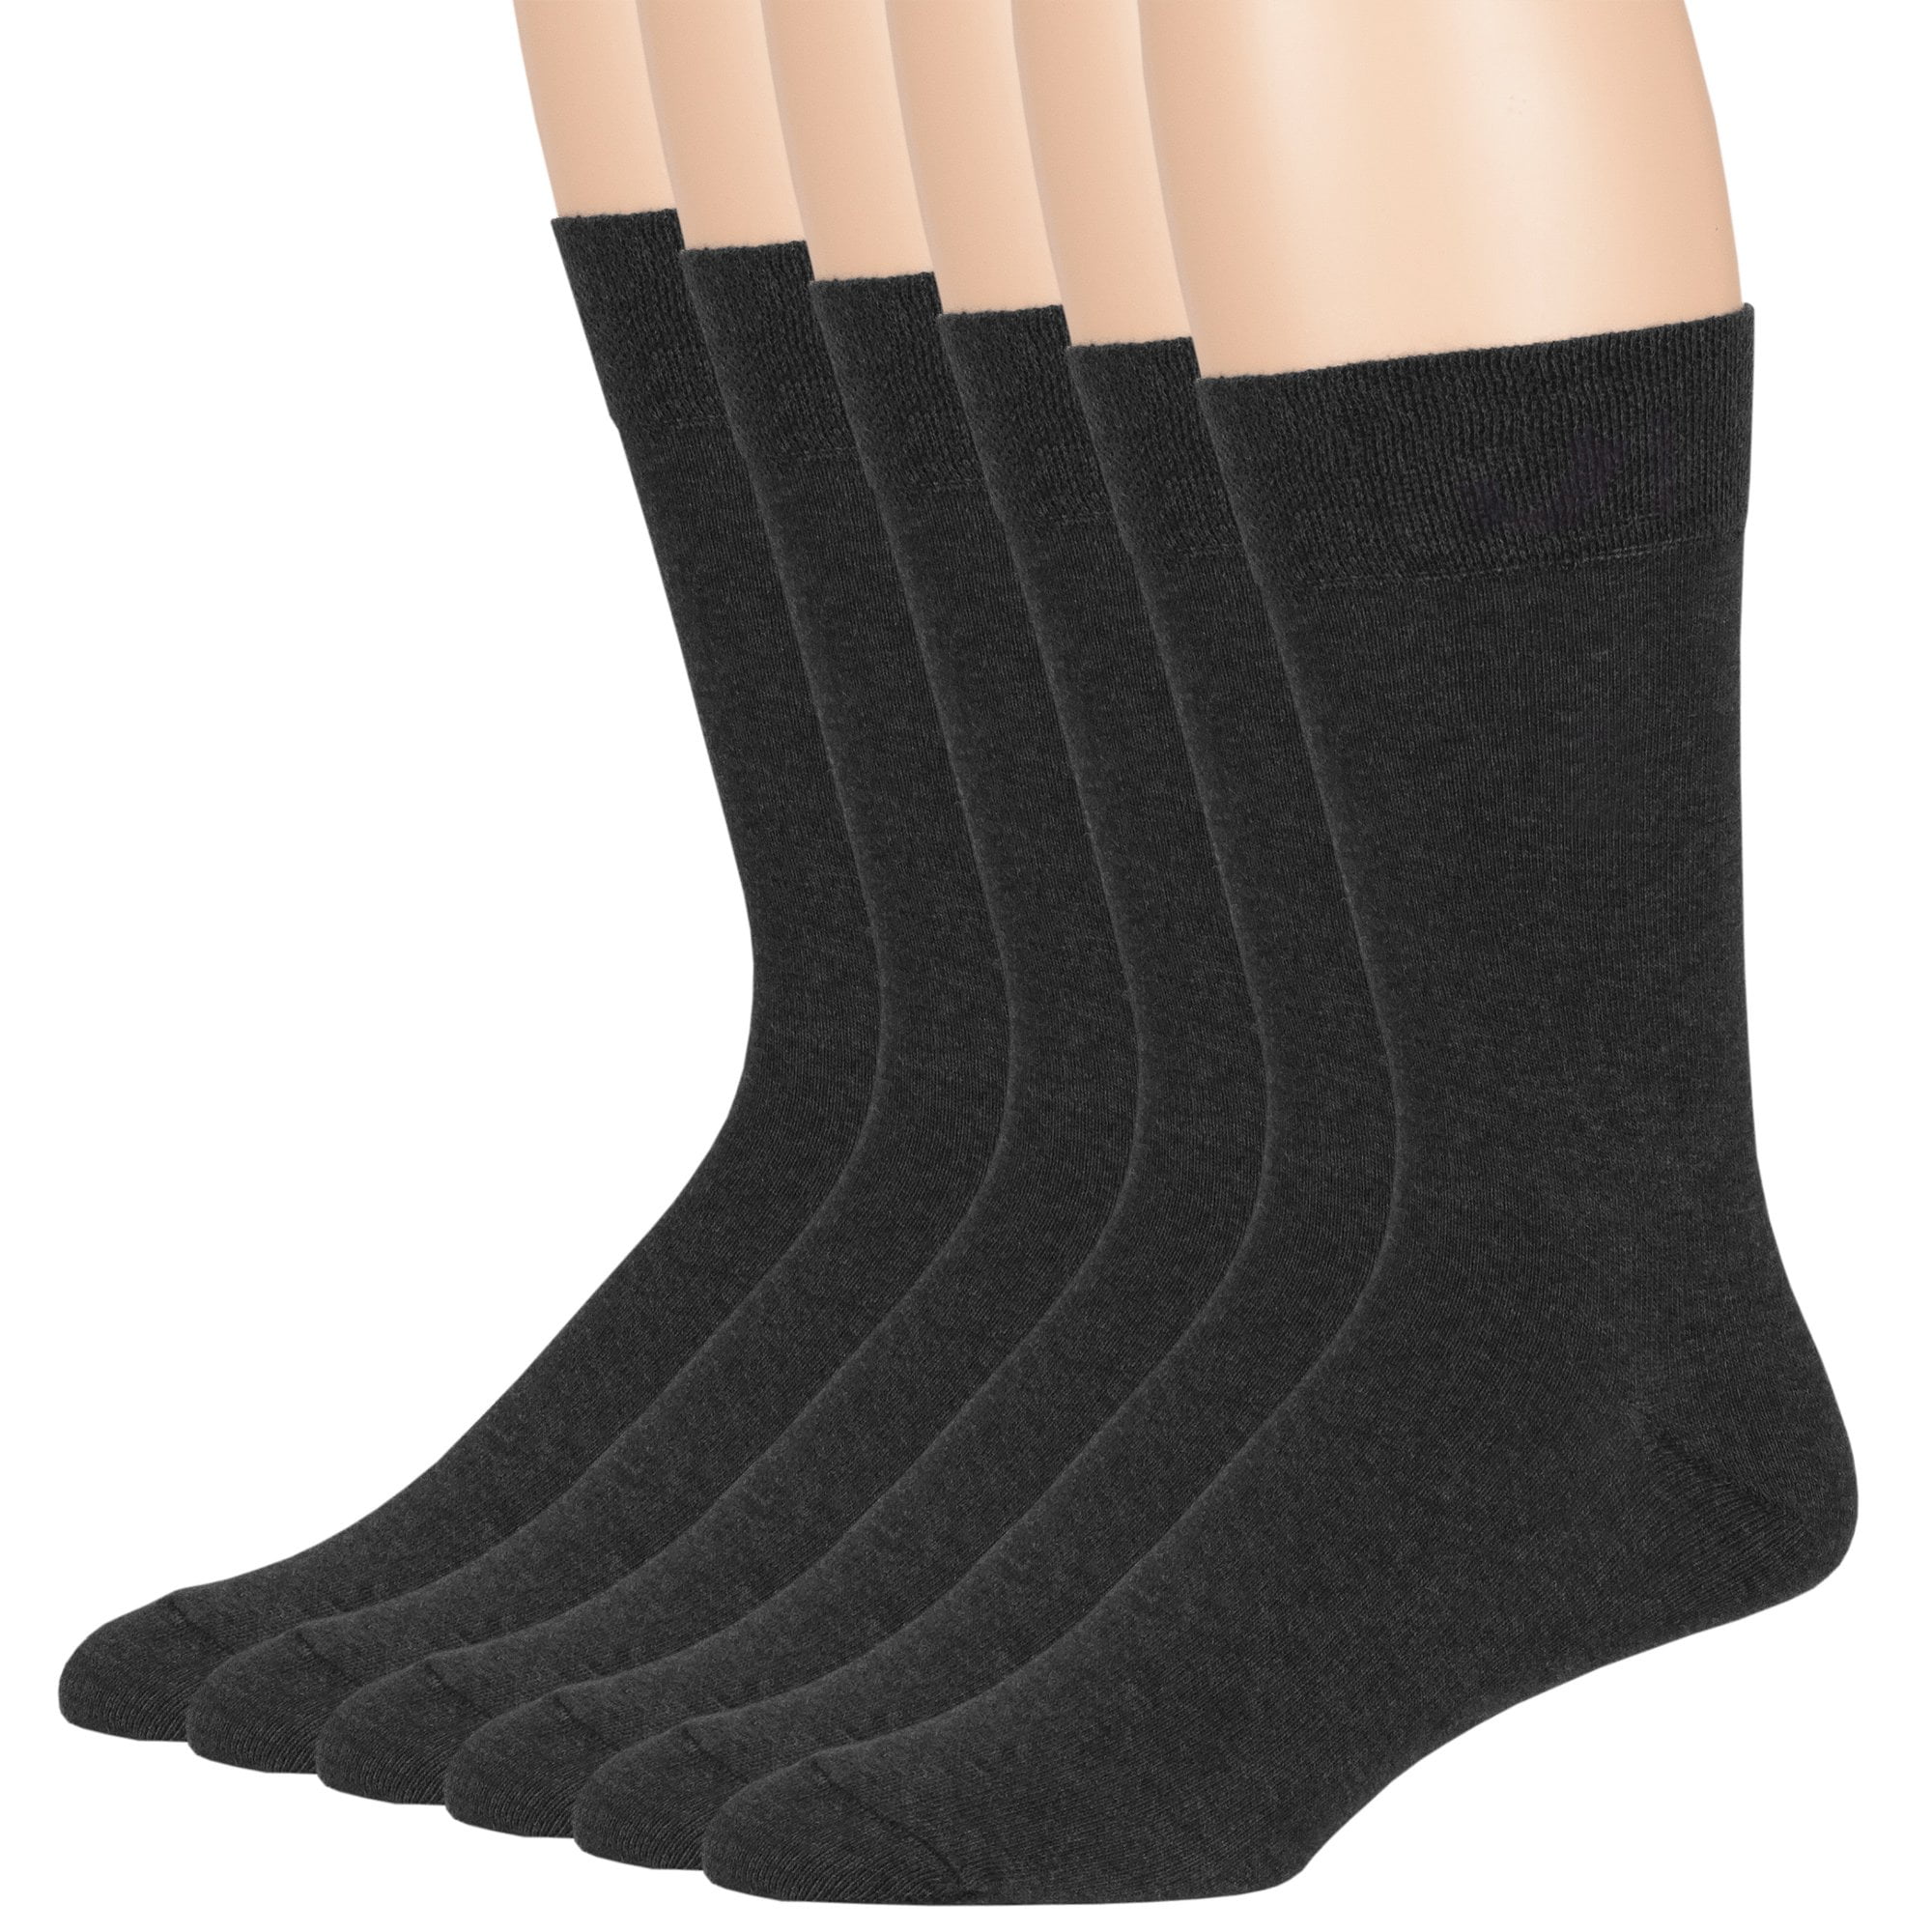 Mens Cotton Casual Plus Size Crew Socks, Charcoal, X-Large 13-15, 6 ...